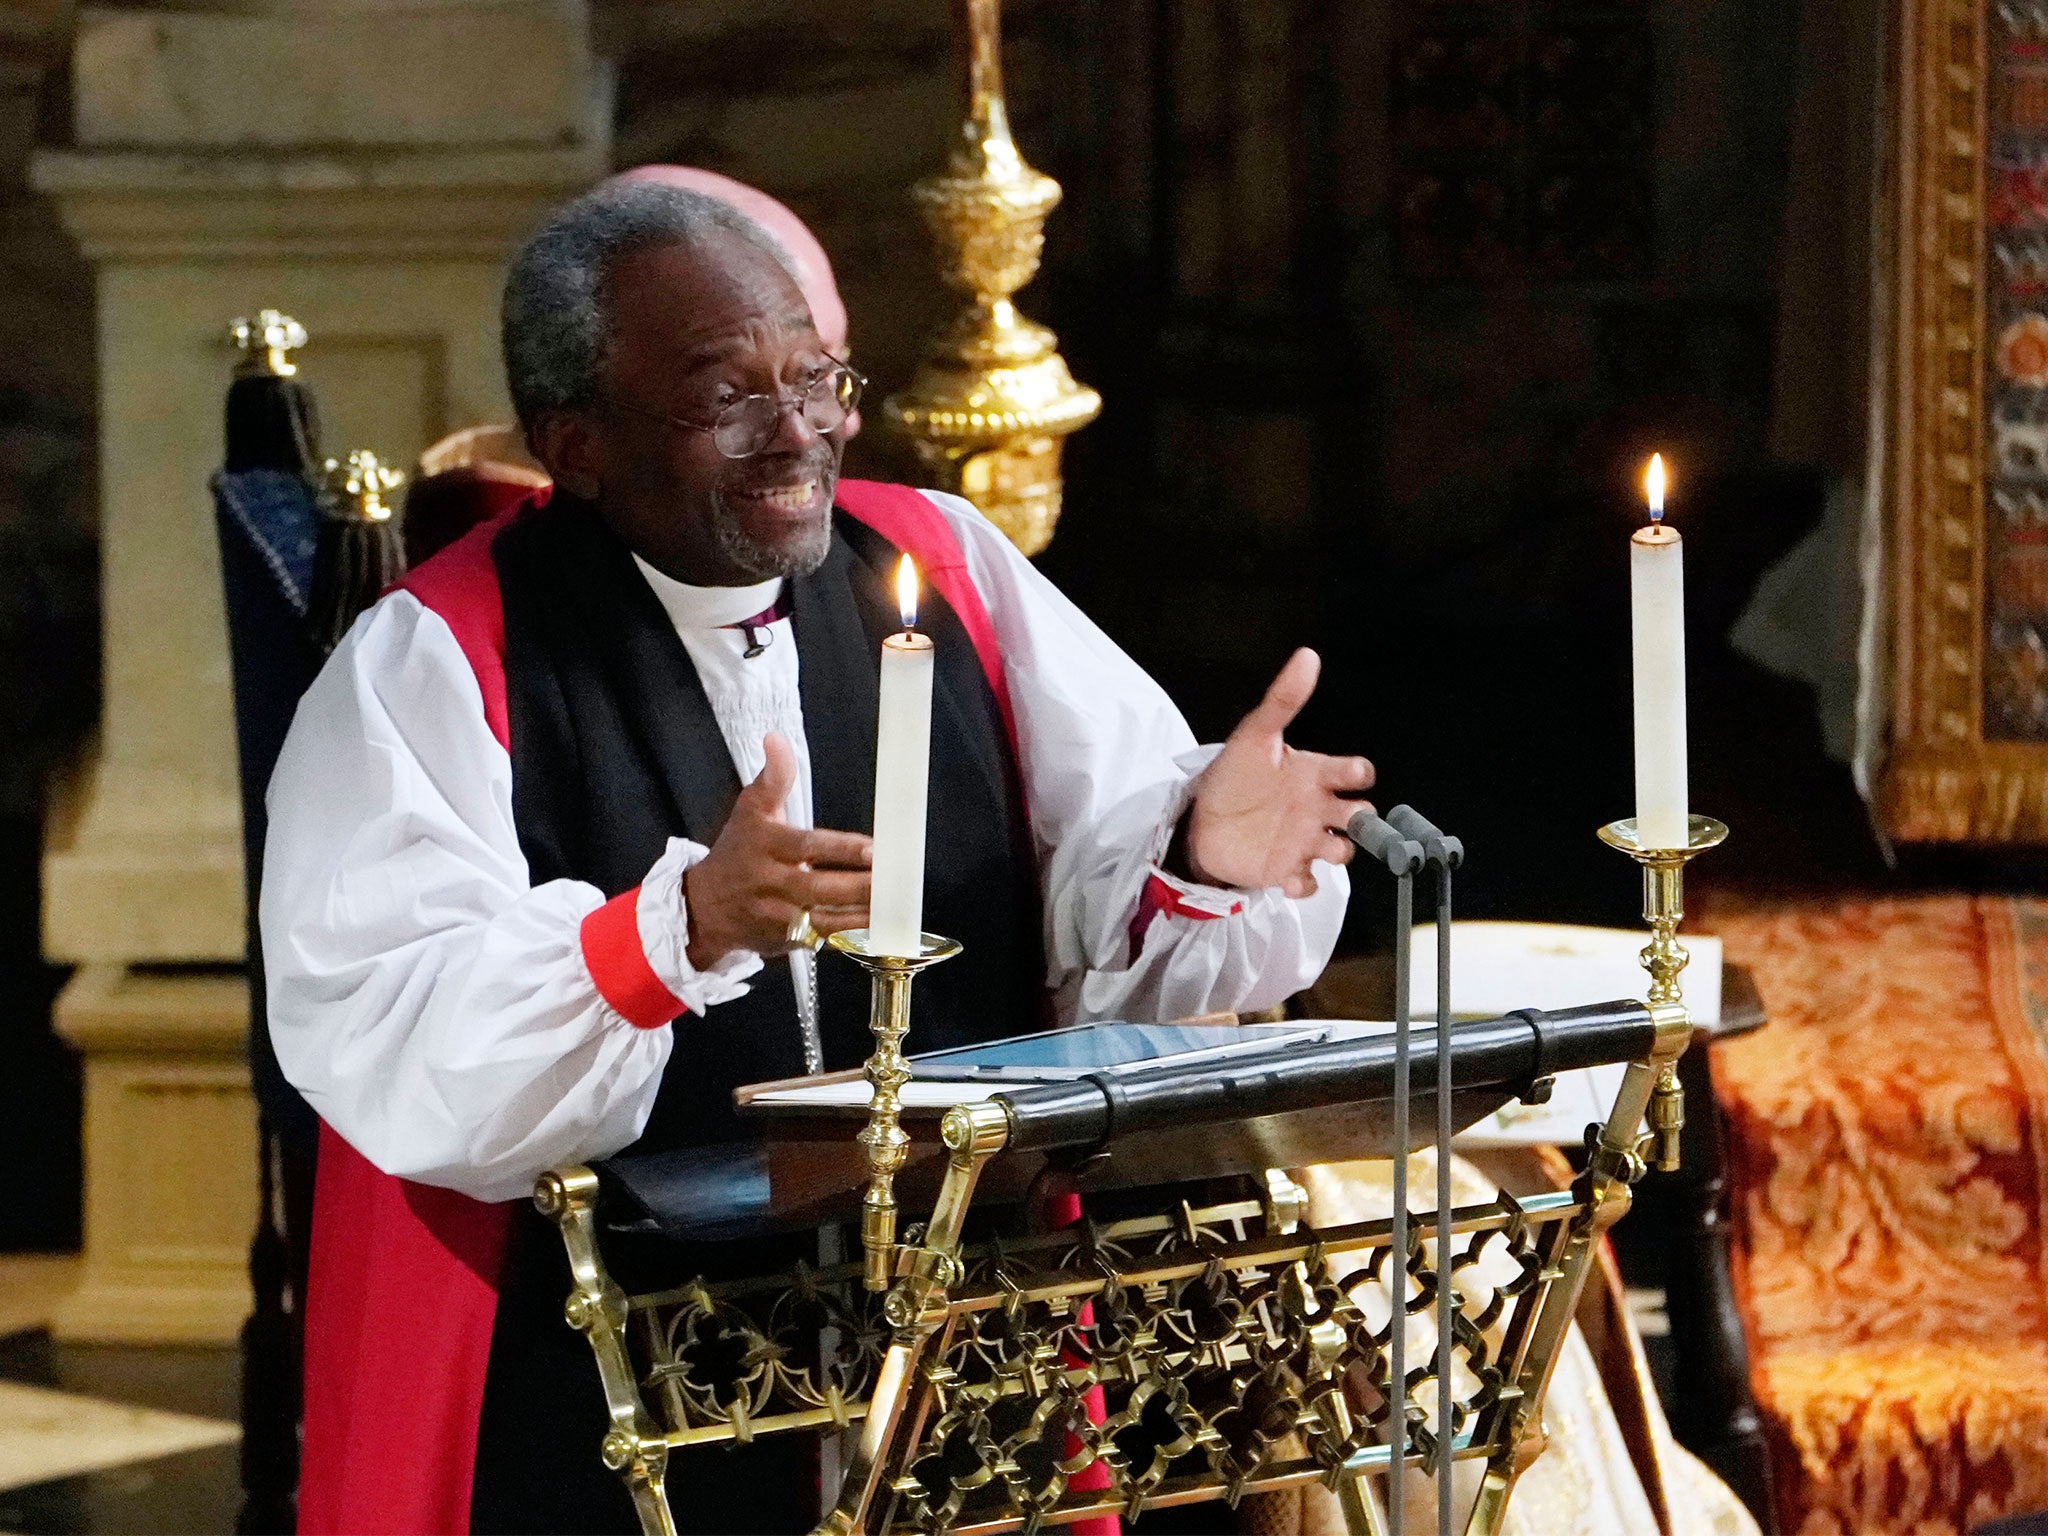 Bishop Michael Curry delivered a passionate sermon during the royal wedding ceremony